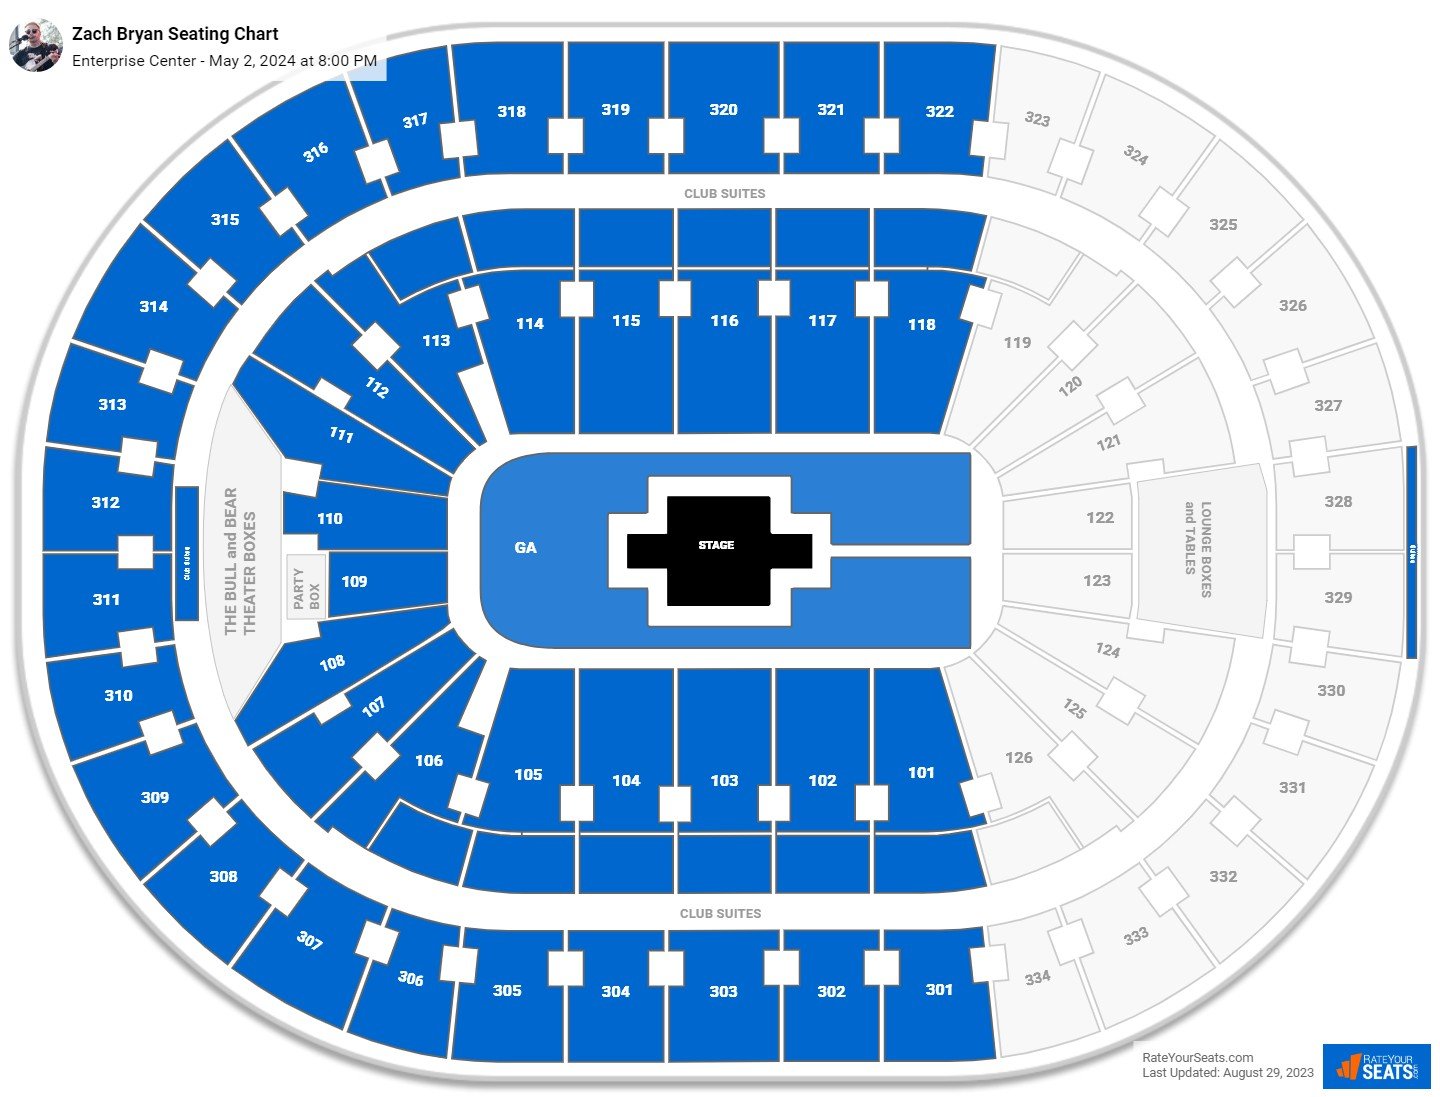 Enterprise Center - St Louis, MO  Tickets, 2023-2024 Event Schedule,  Seating Chart